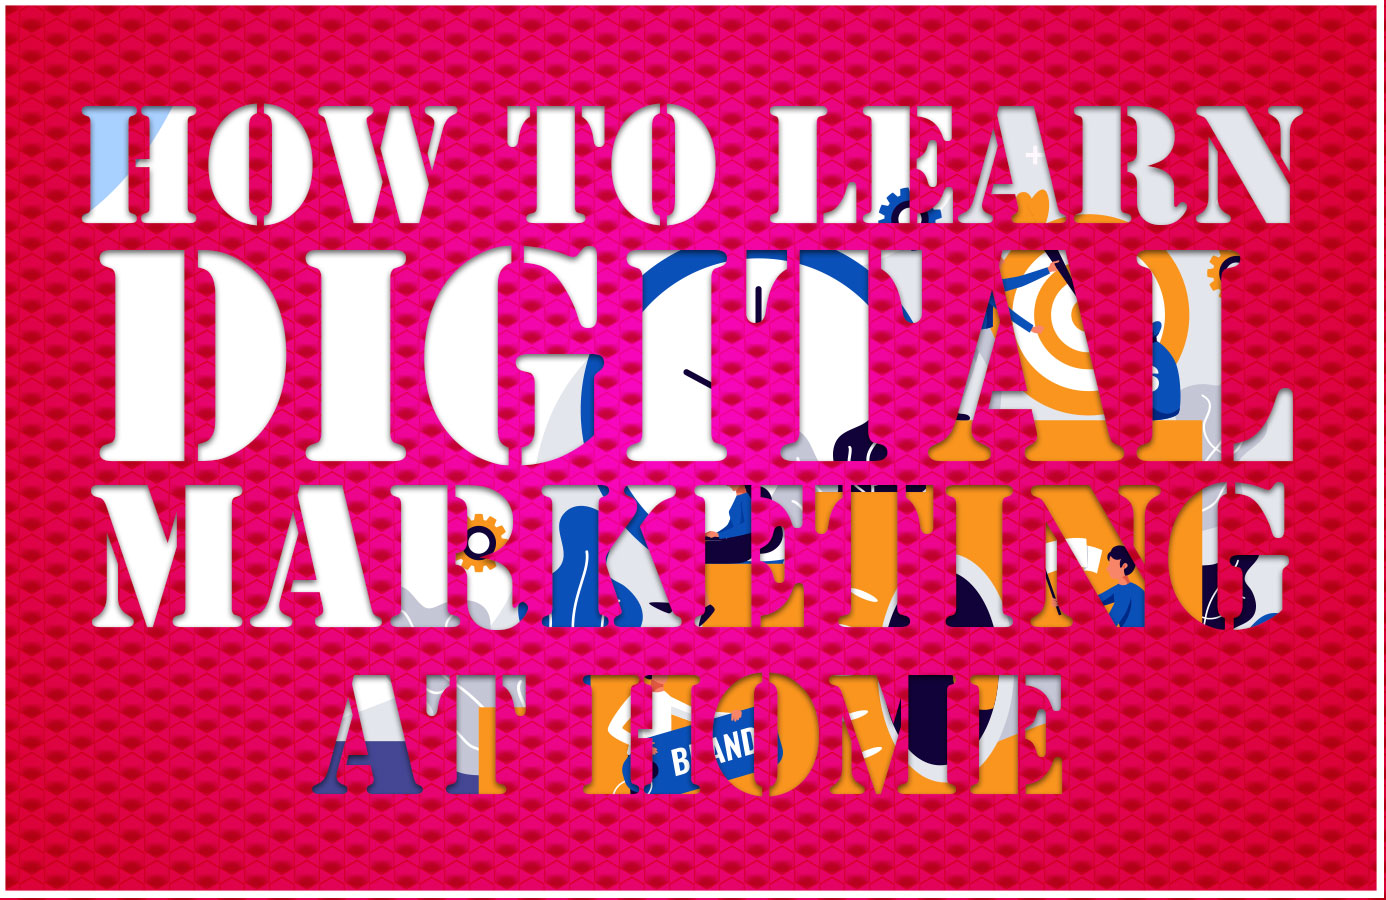 How to Learn Digital Marketing At Home